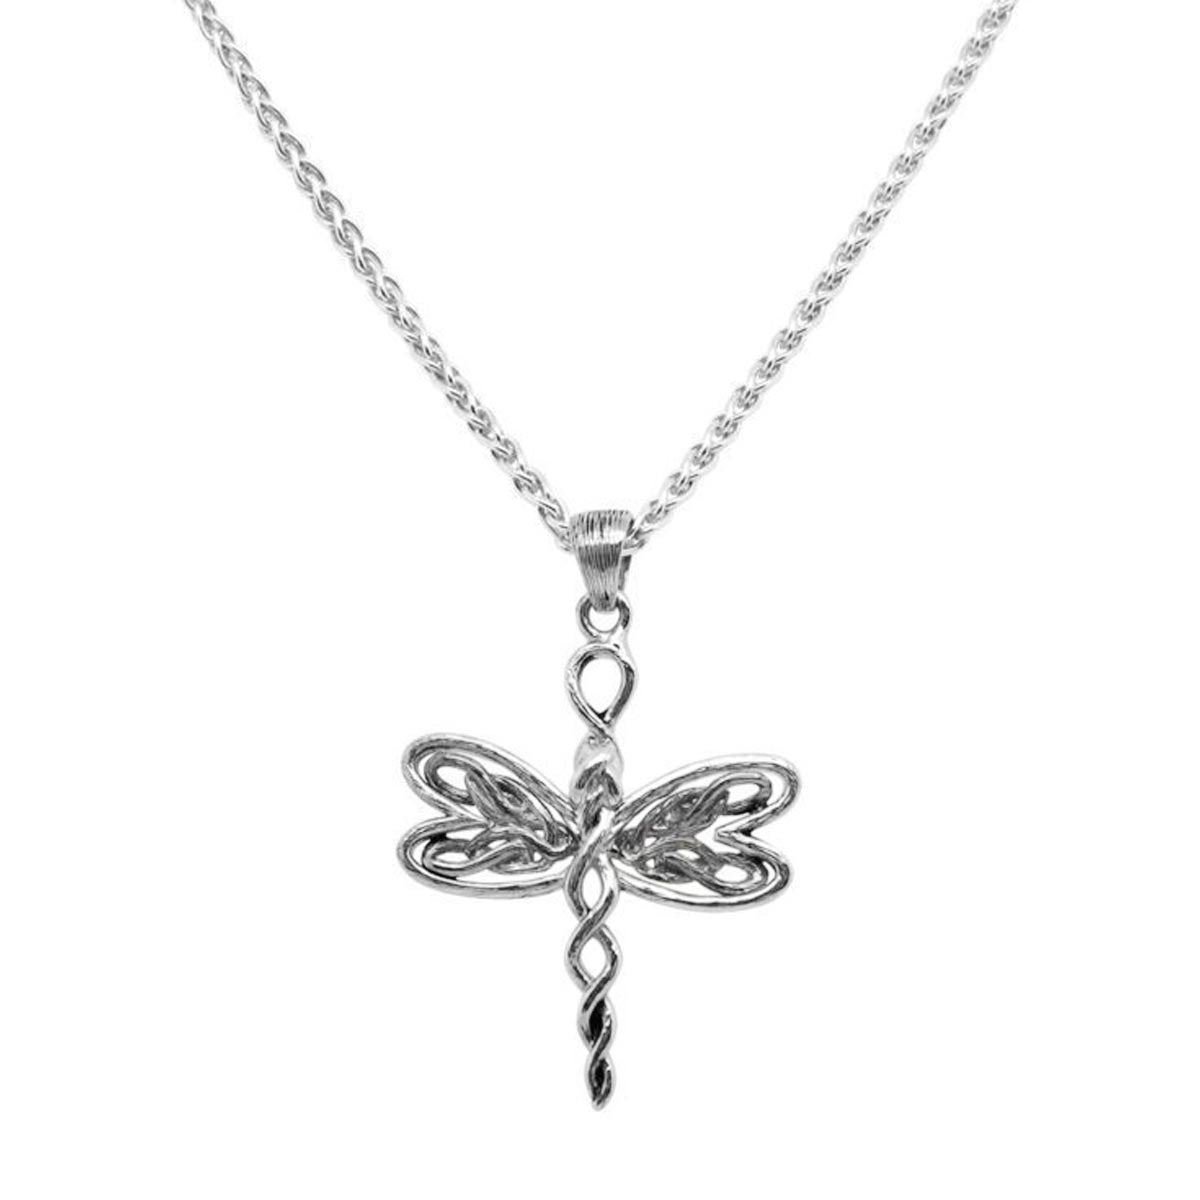 Keith Jack Petite Dragonfly Necklace in Sterling Silver